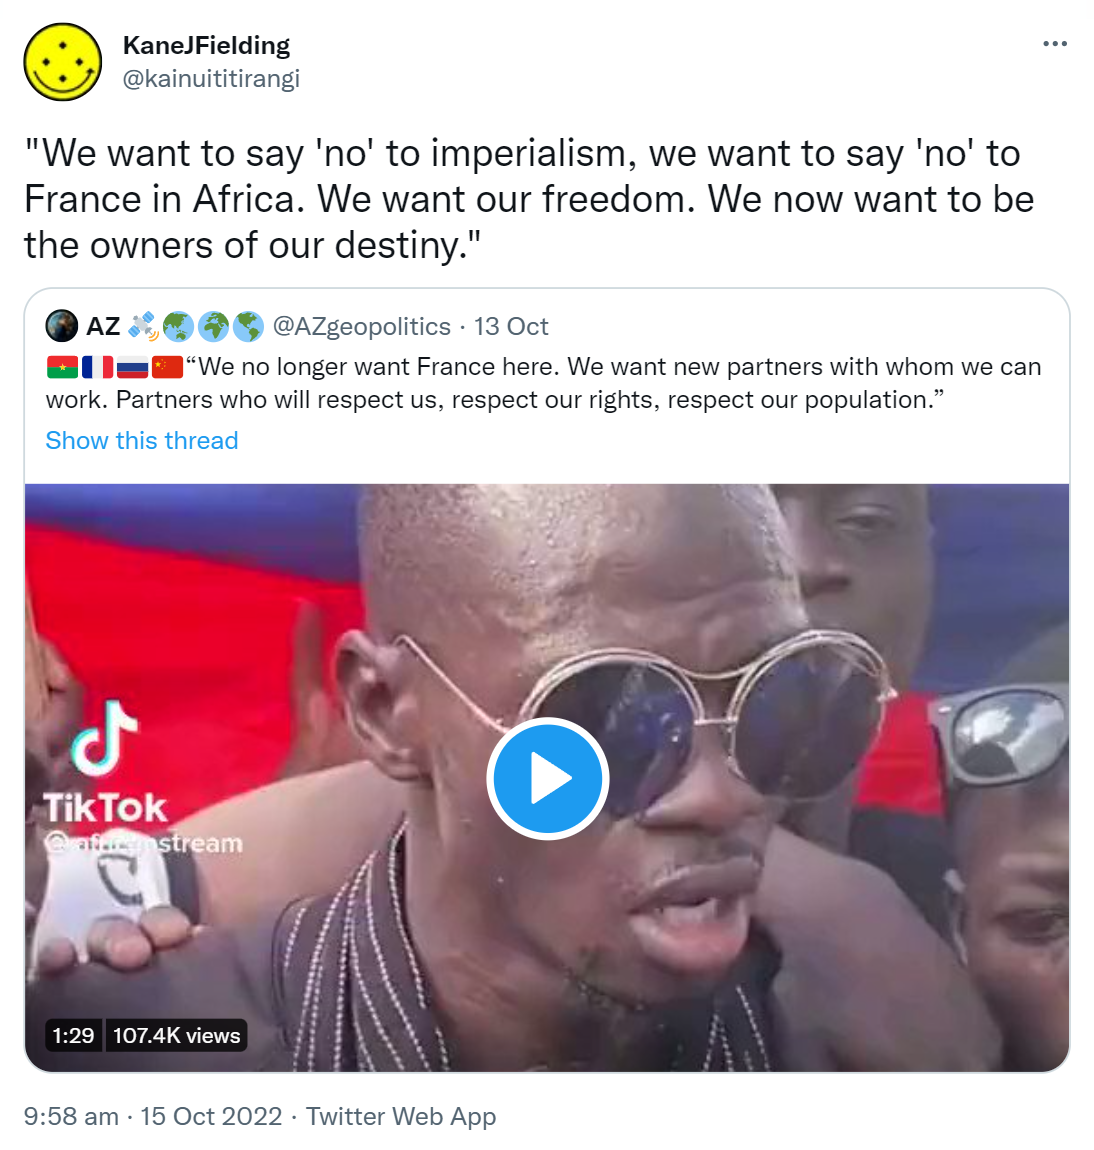 We want to say 'no' to imperialism, we want to say 'no' to France in Africa. We want our freedom. We now want to be the owners of our destiny. Quote Tweet. AZ @AZgeopolitics. We no longer want France here. We want new partners with whom we can work. Partners who will respect us, respect our rights, respect our population. 9:58 am · 15 Oct 2022.